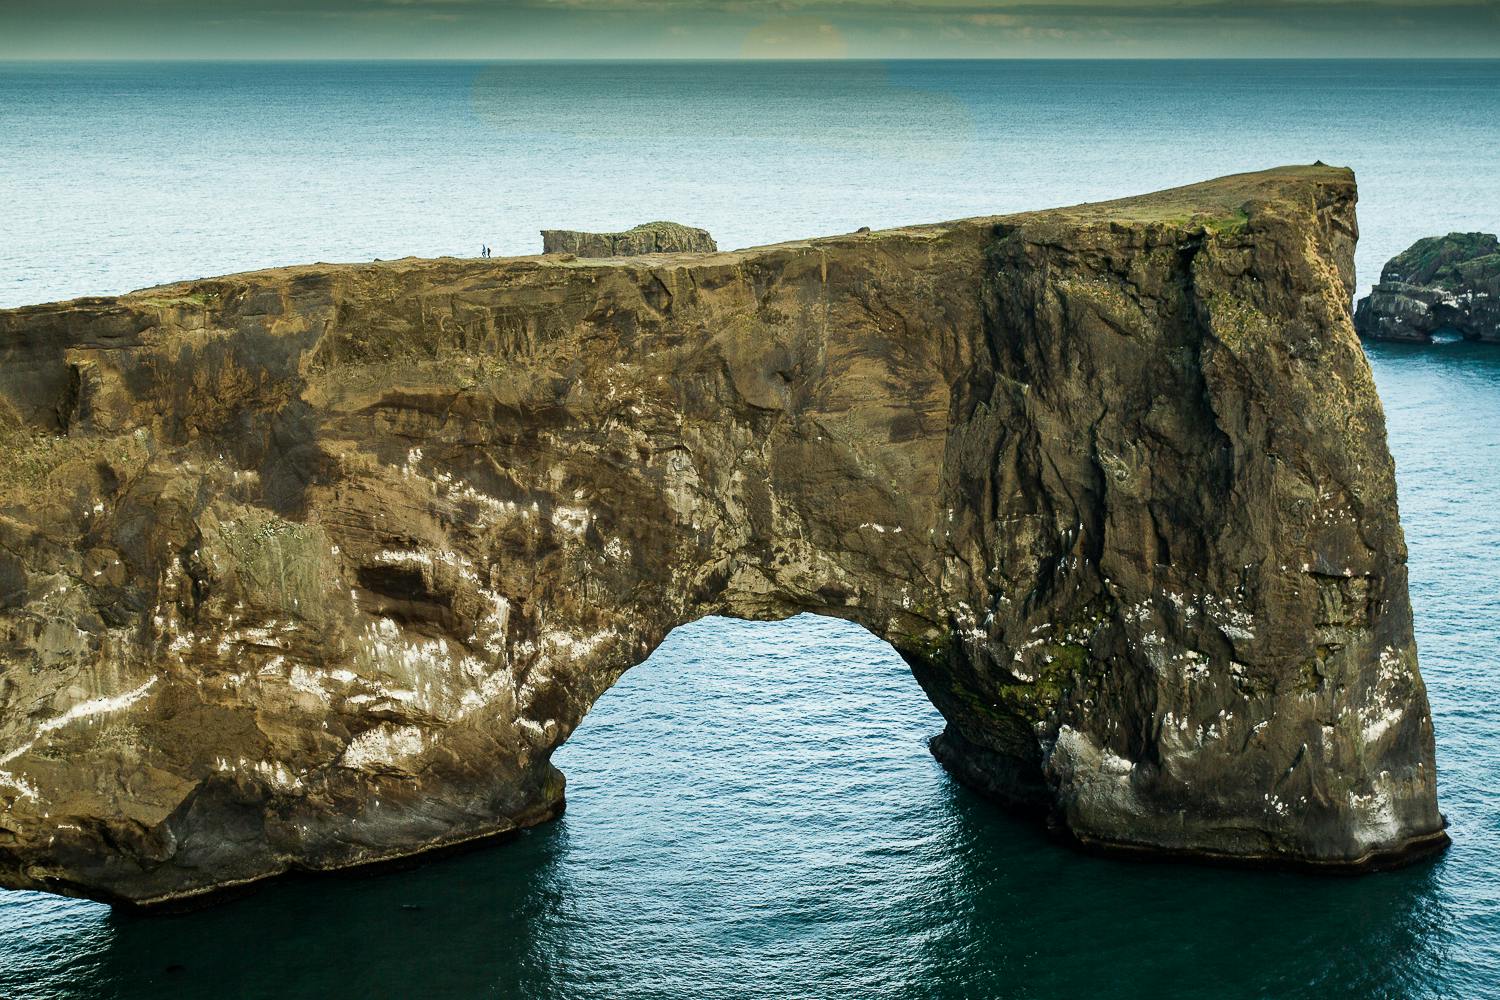 Dyrhólaey is instantly recognisable thanks to the distinctive rock arch that sits beneath the cliff face.